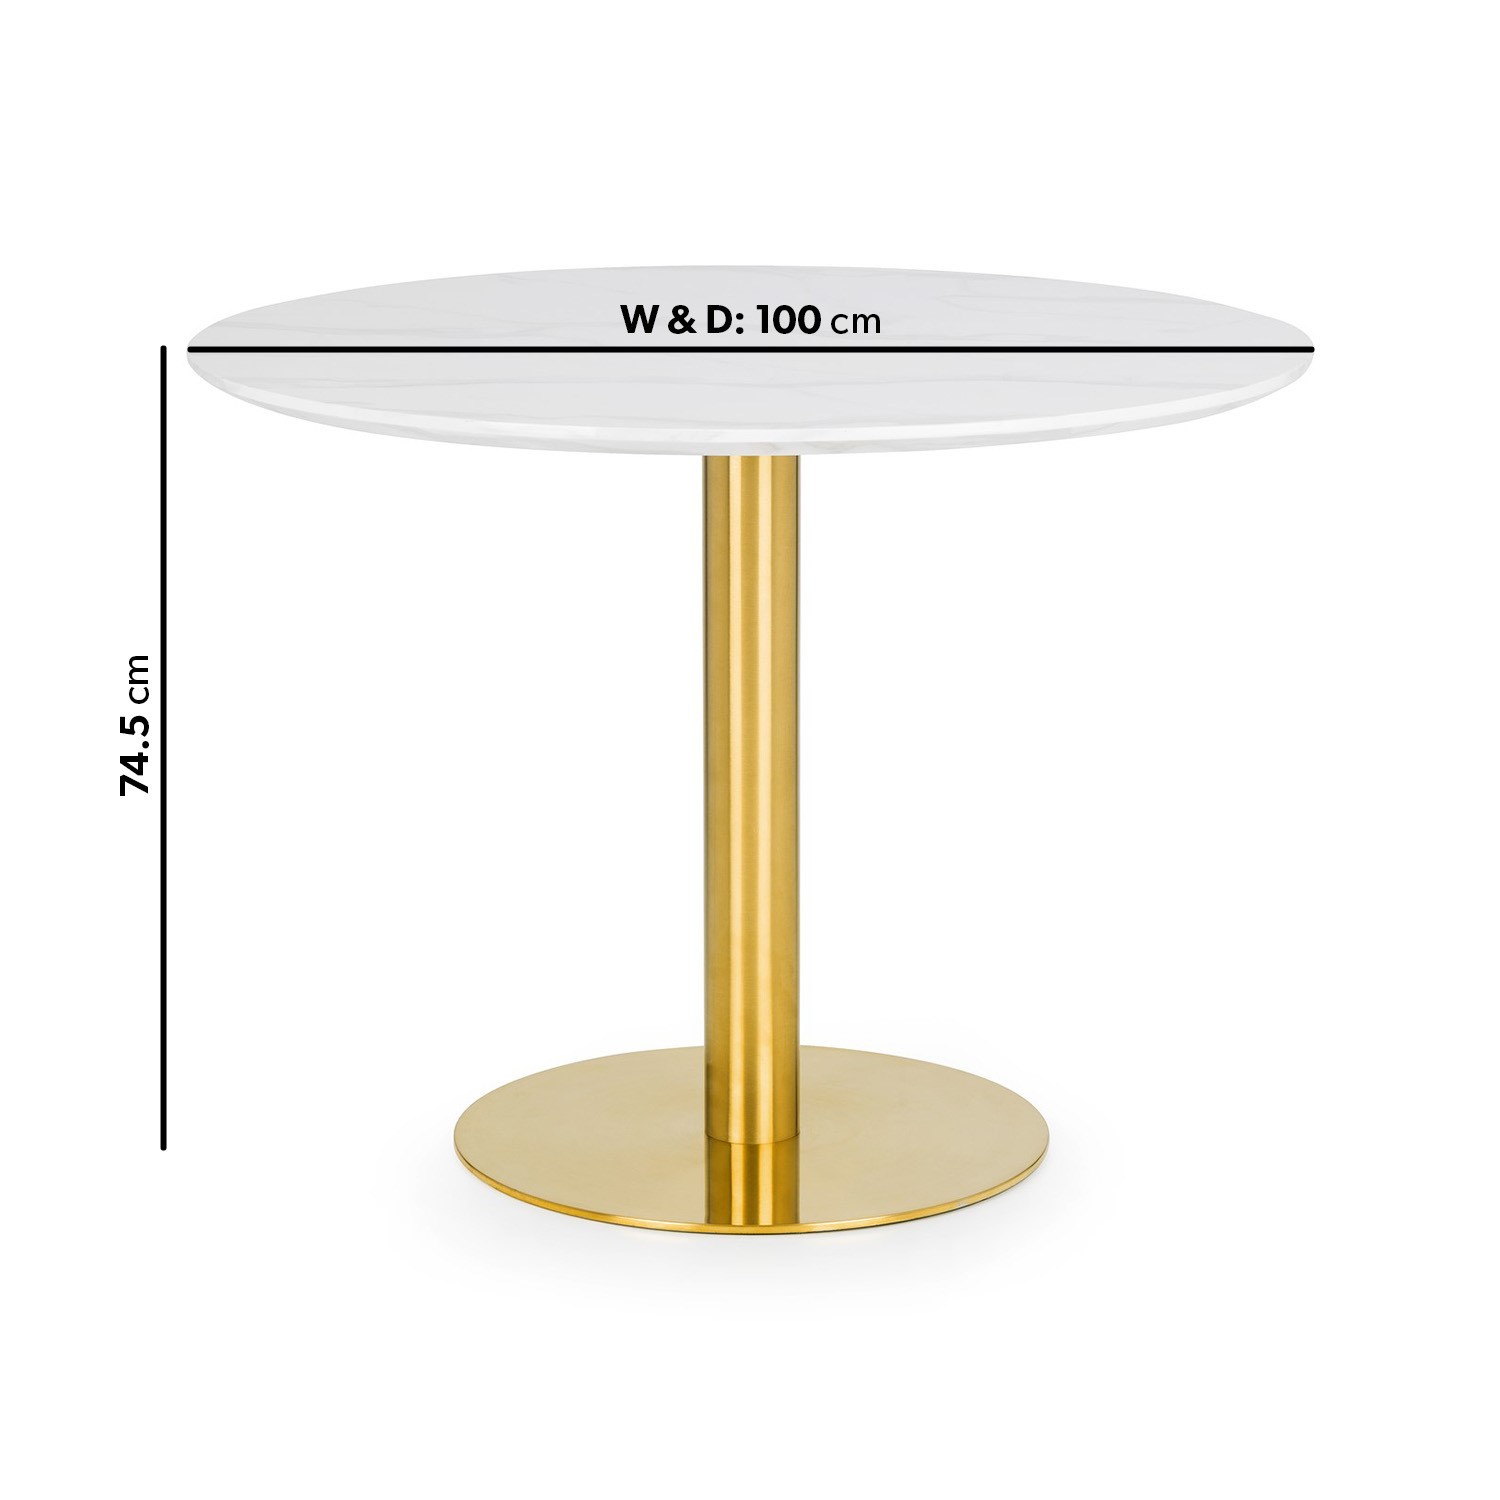 Read more about Round marble top dining table seats 4 palermo